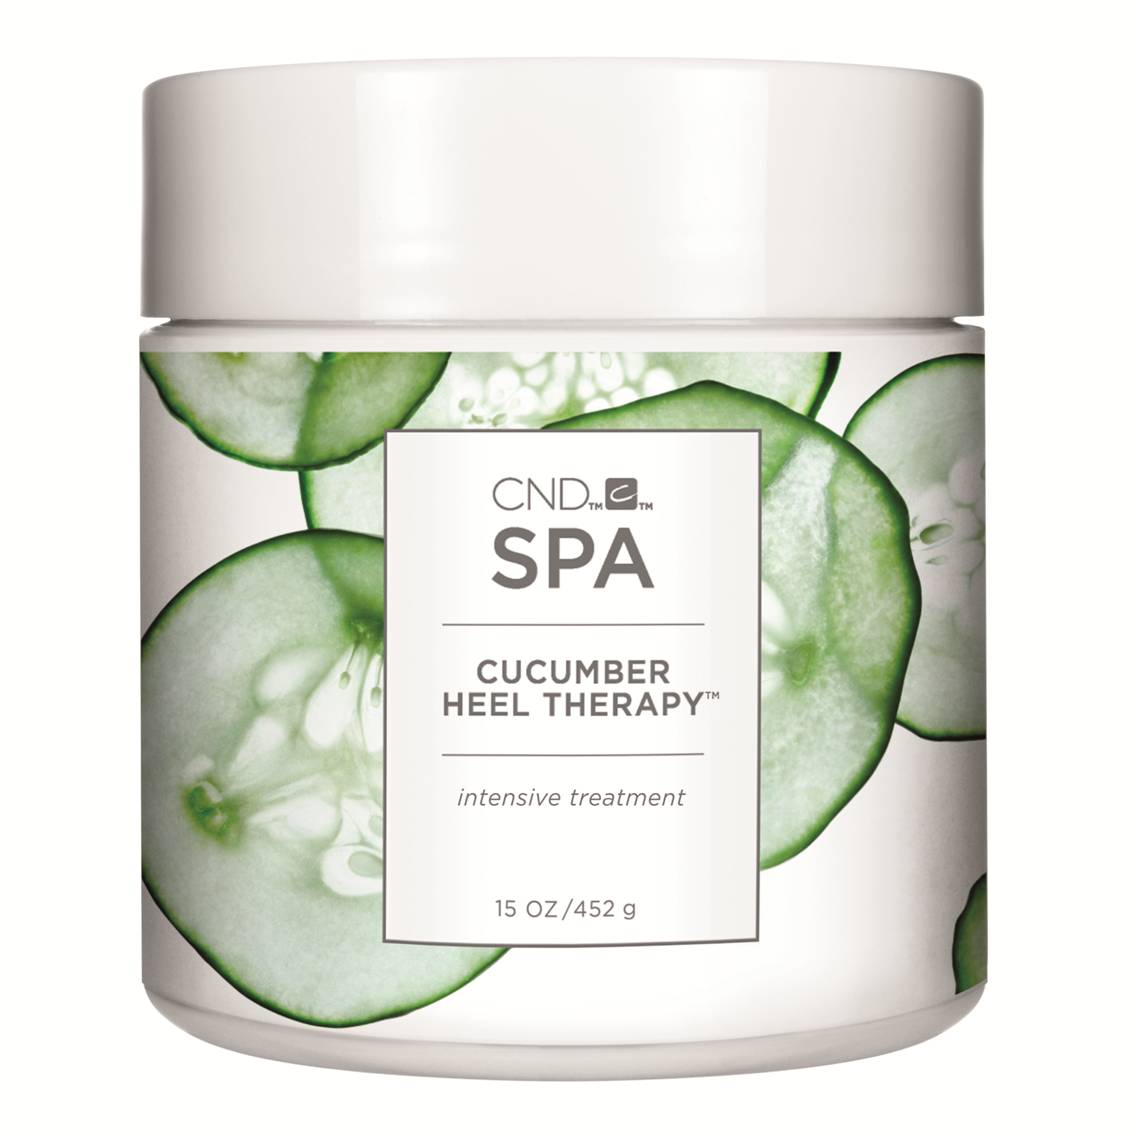 CND™ Cucumber Heel Therapy™ Intensive Treatment